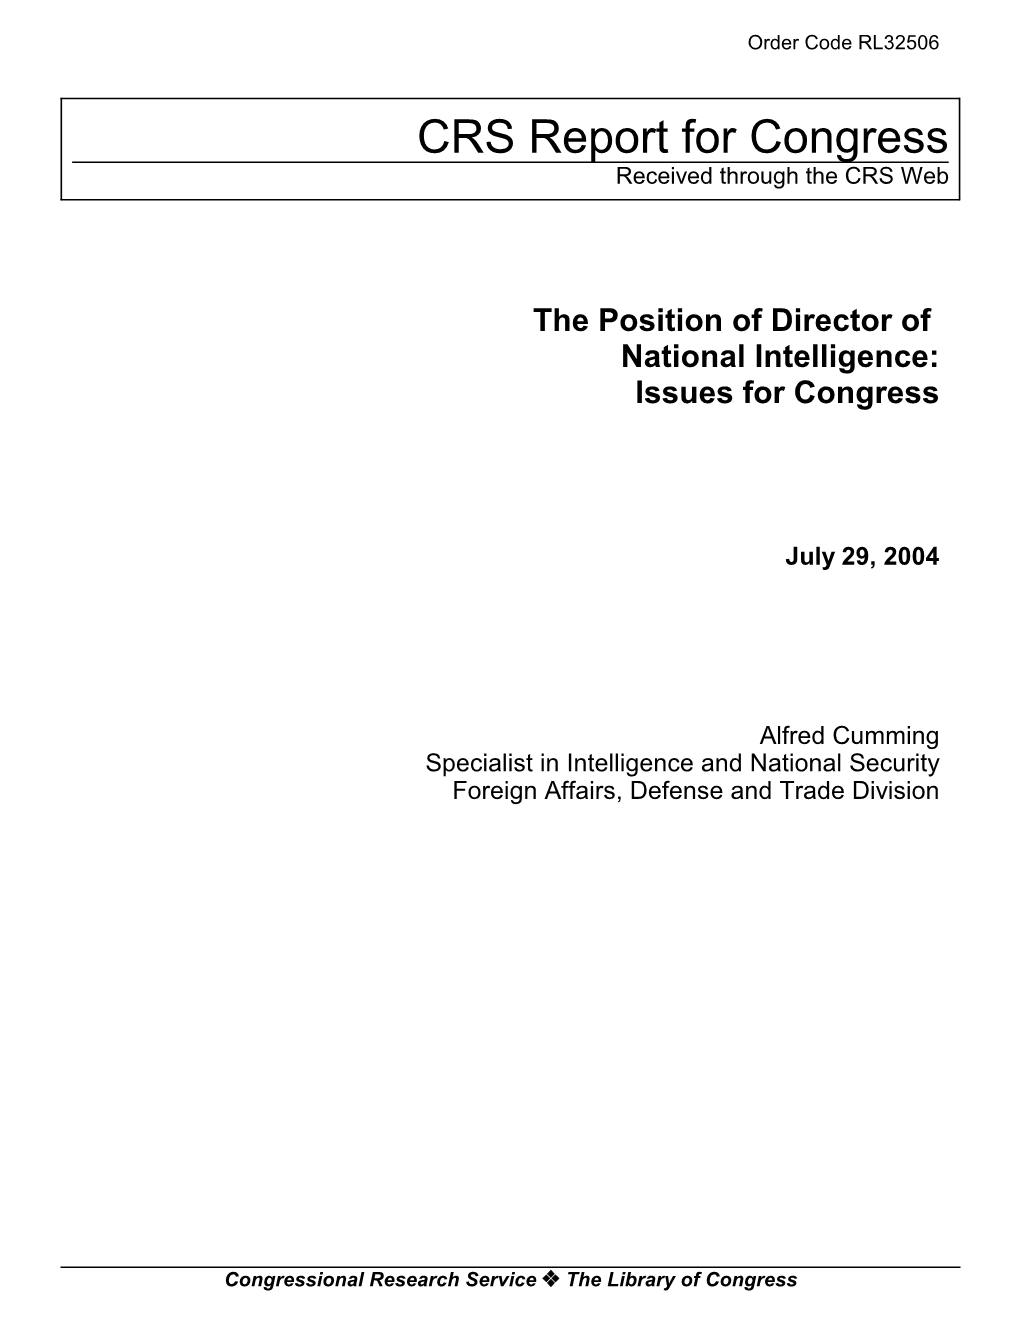 The Position of Director of National Intelligence: Issues for Congress